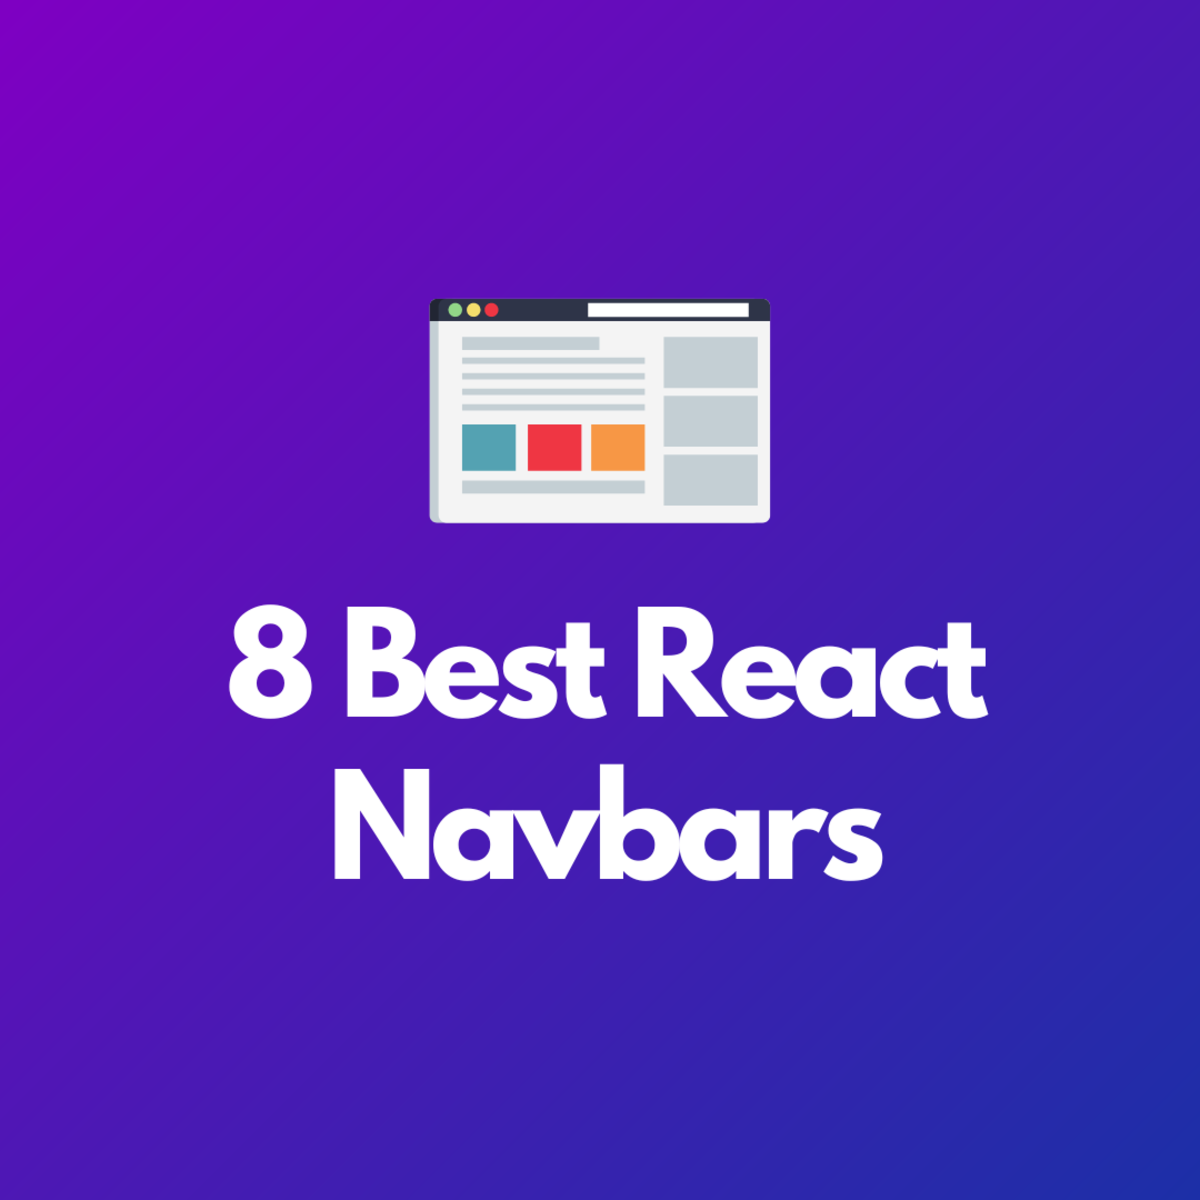 8 Best React Navbars You Can Add to Your Site: The Ultimate List